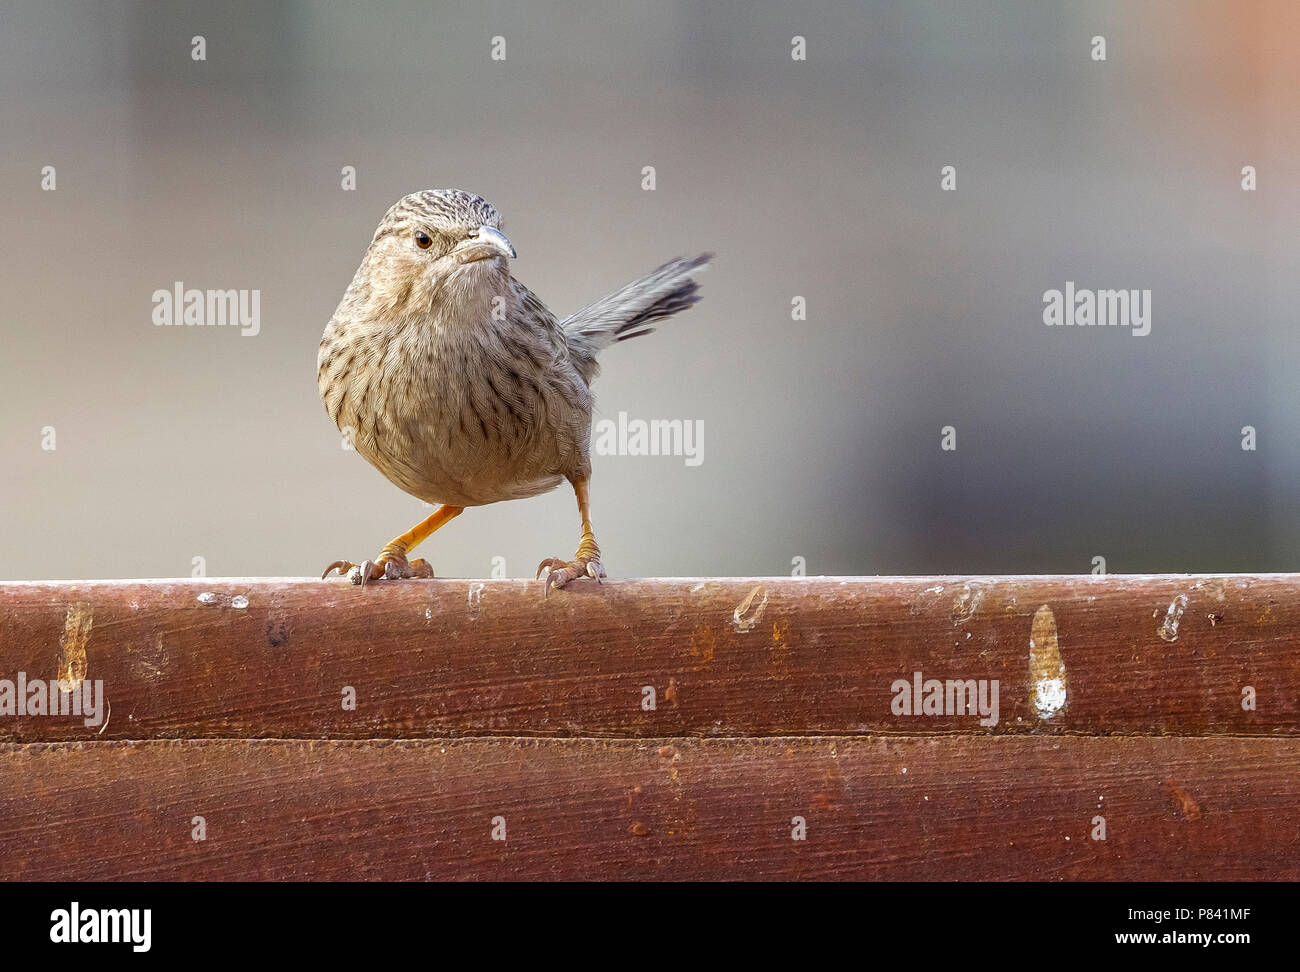 Afghan Babbler perched on branch in Kuwait. December 2010. Stock Photo